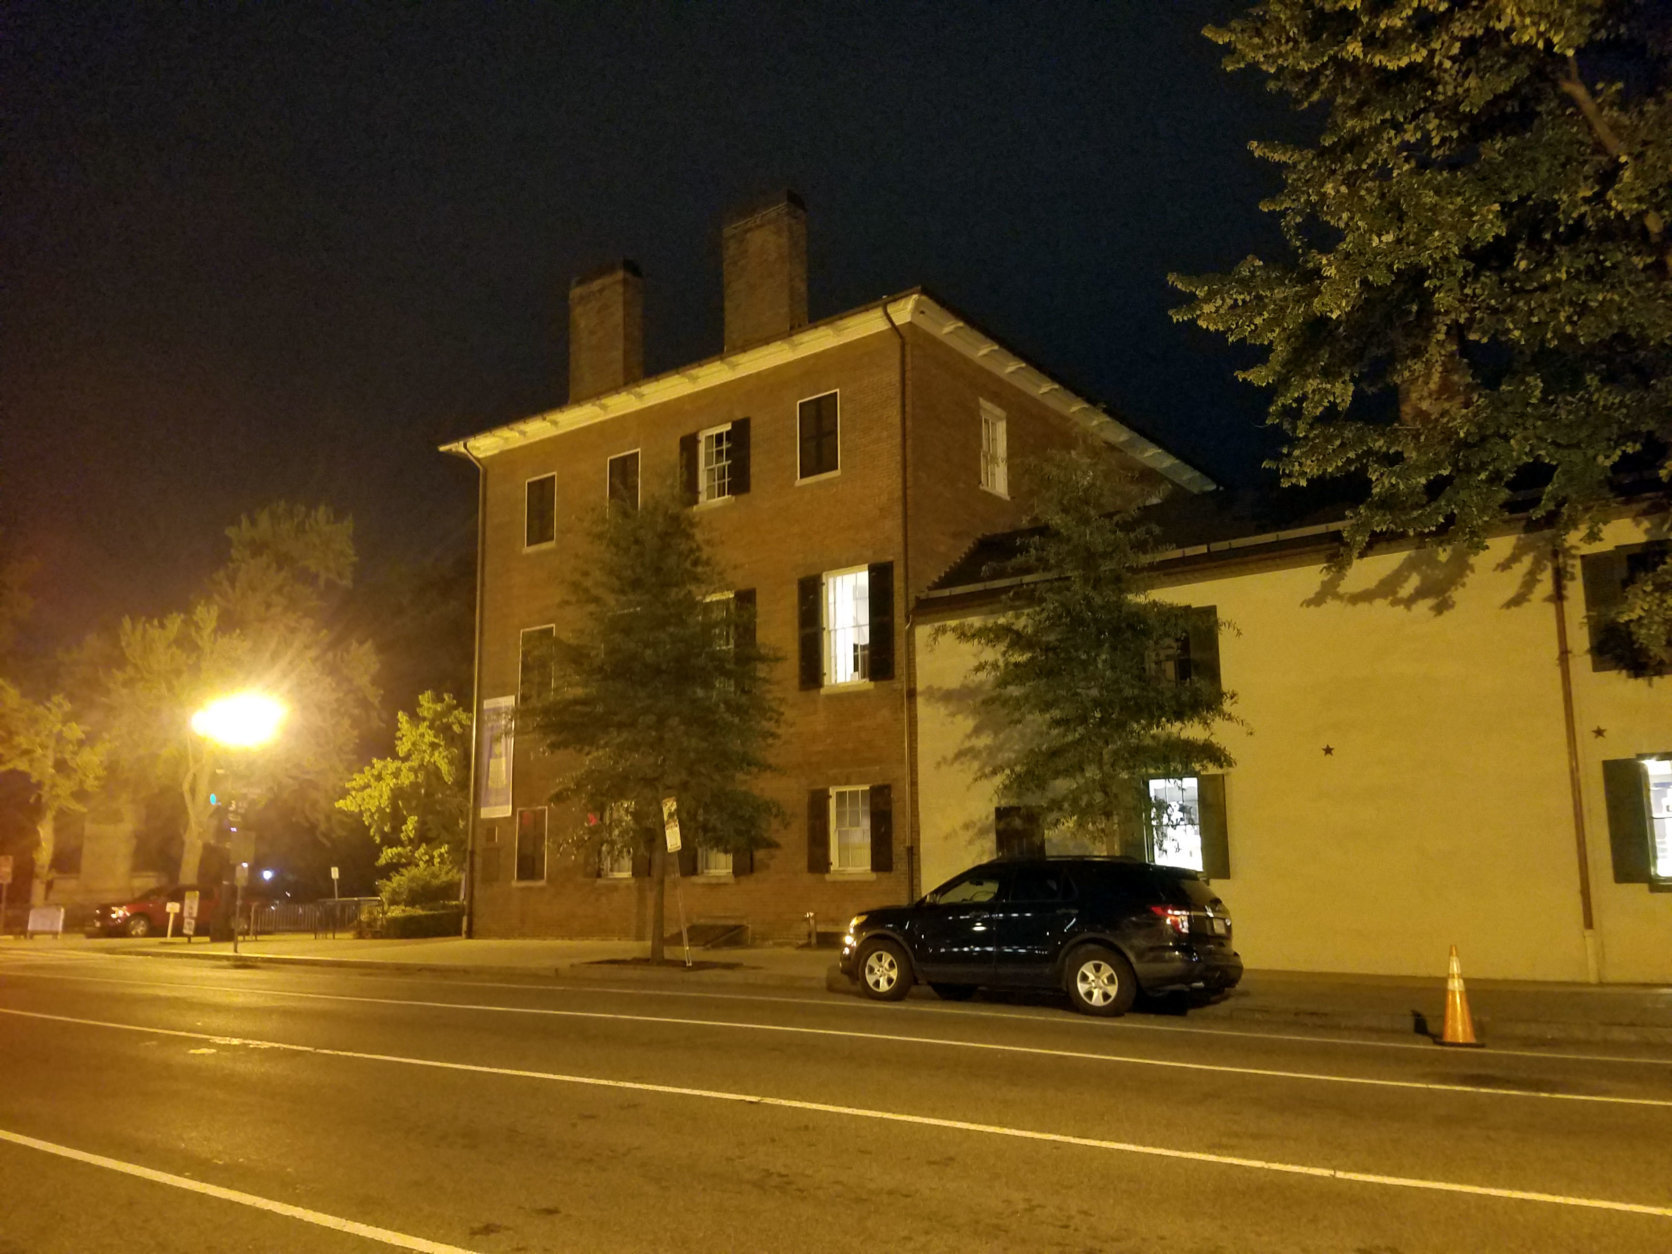 The Decatur House stands at the edge of Lafayette Square. It's said to be haunted by Stephen Decatur, who died in a duel. (WTOP/Will Vitka)